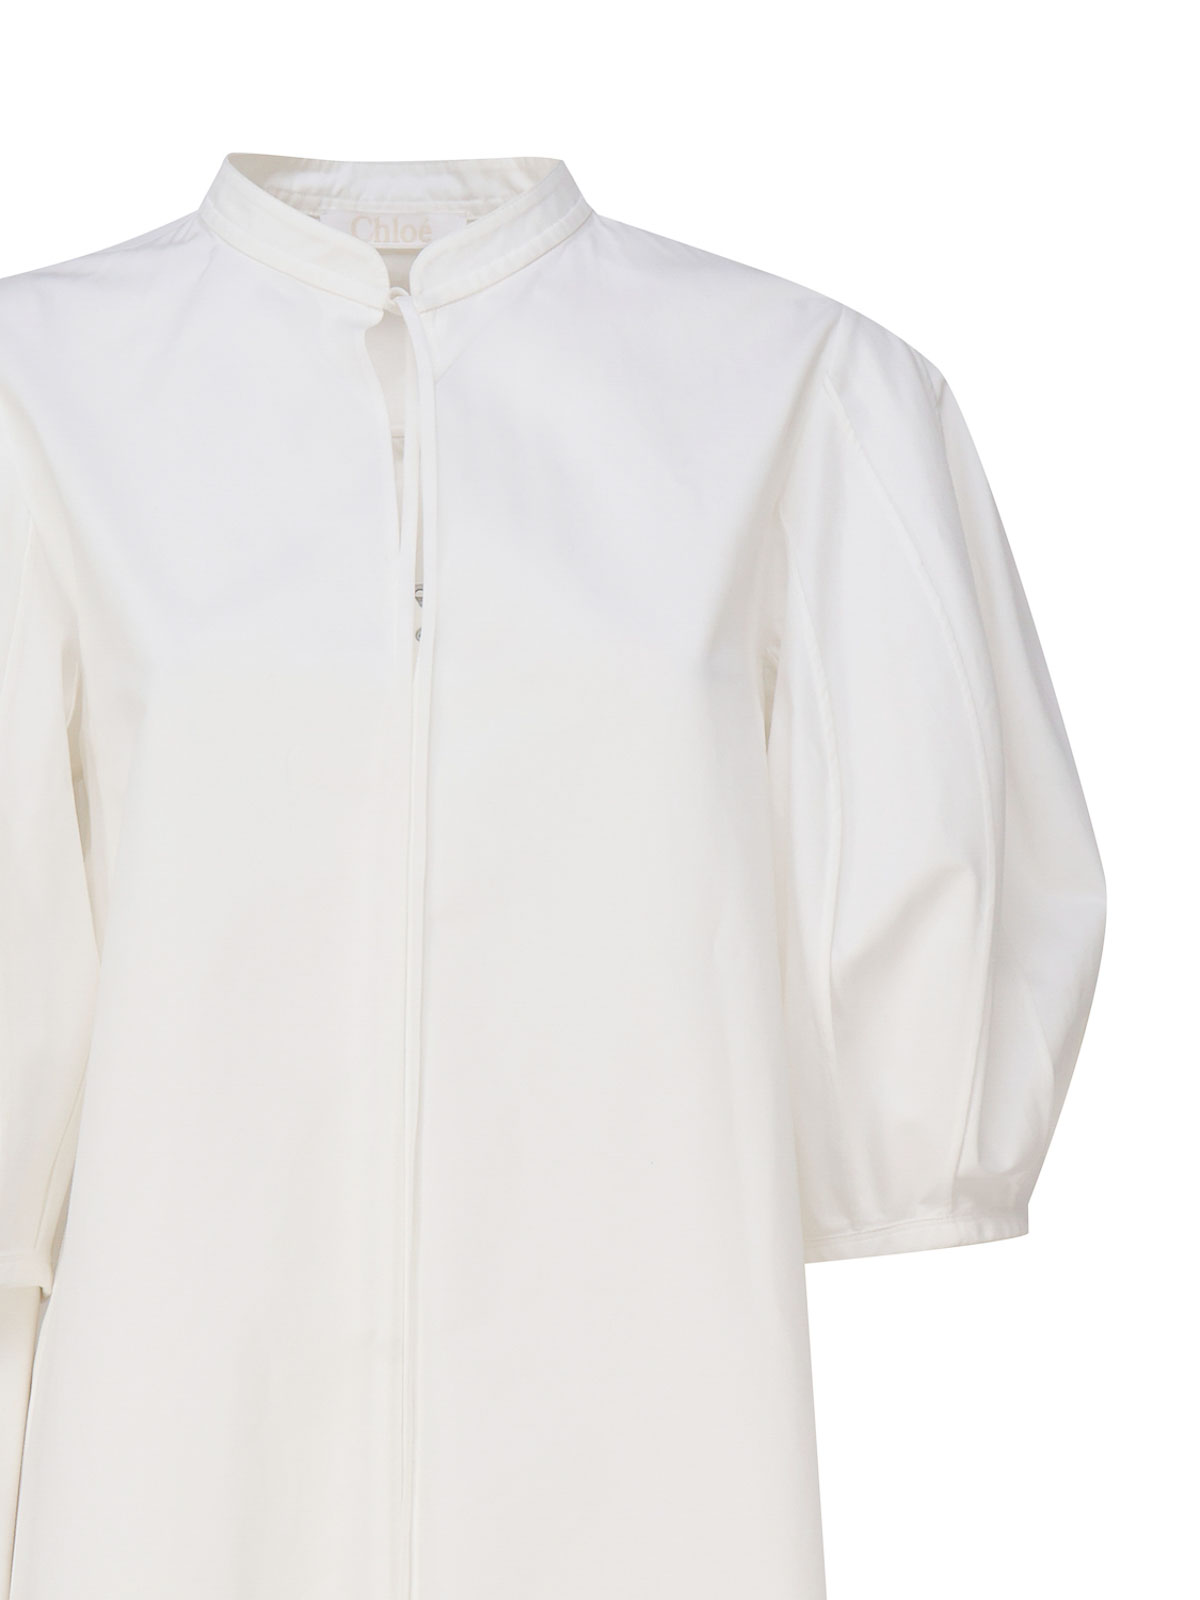 Shop Chloé Tunic Style Shirt With Ribbon In White